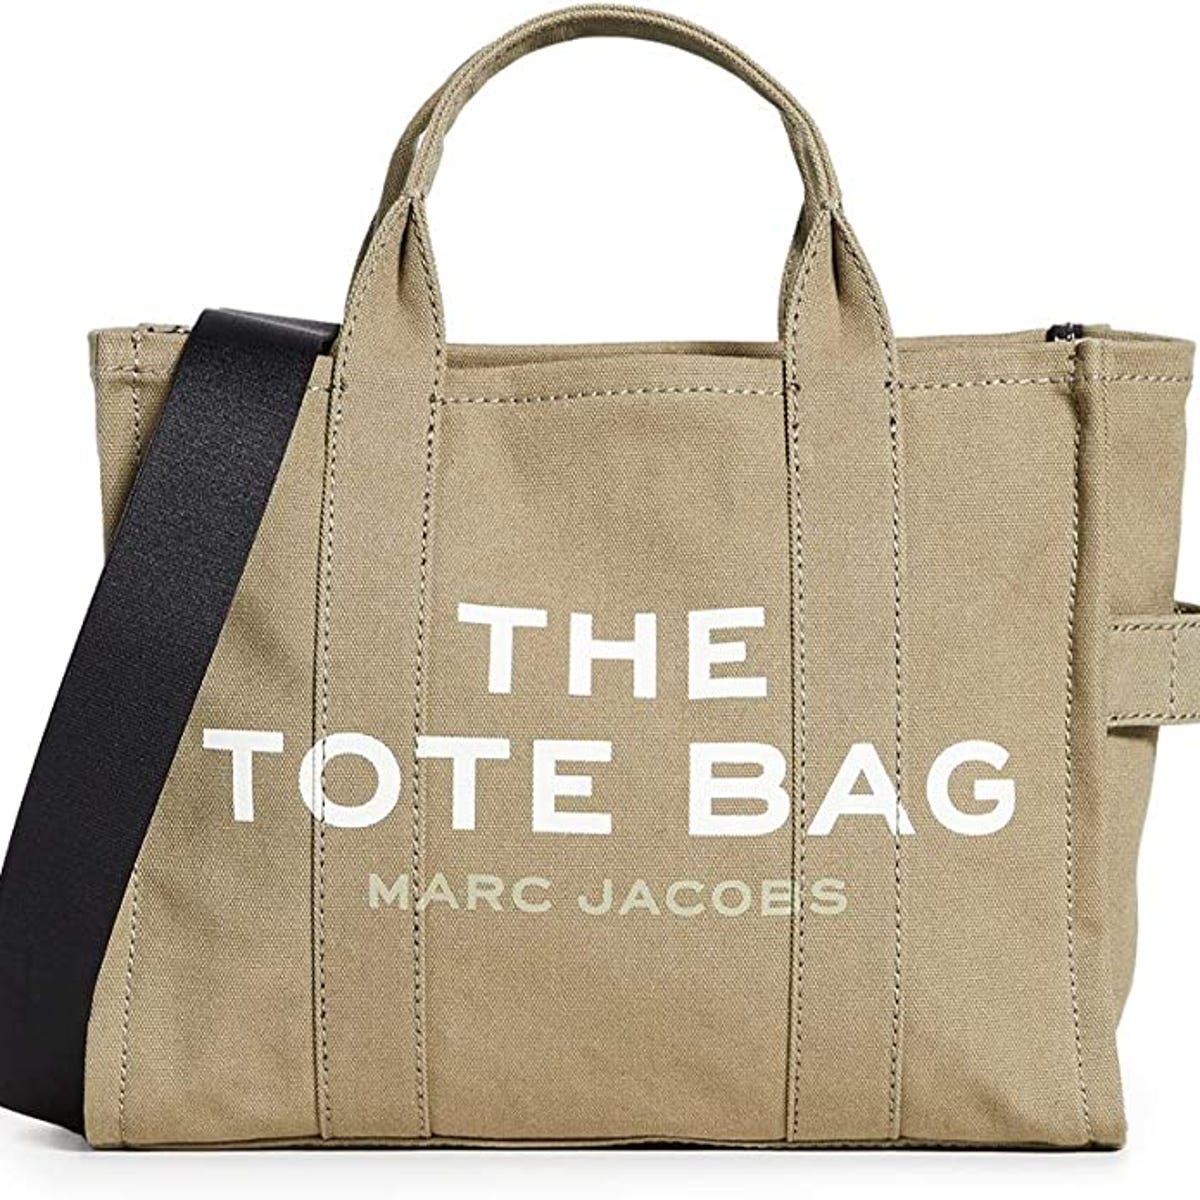 That Wildly Trendy Marc Jacobs Tote Bag Is on Sale for Black Friday - CNET